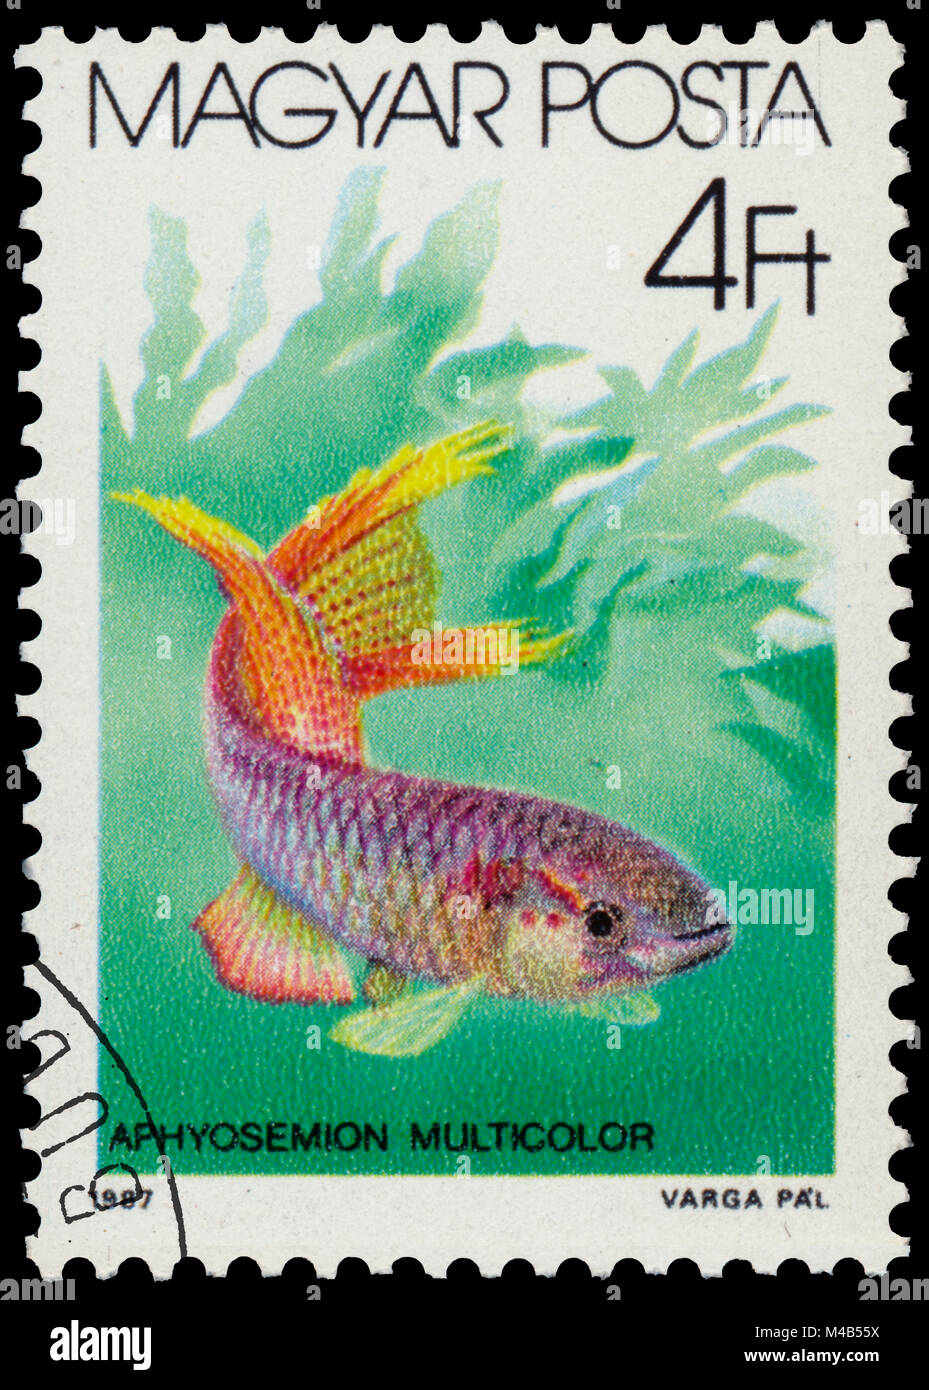 BUDAPEST, HUNGARY - 05 december 2014: a post stamp printed in HUNGARY shows Toy fish (Aphyosemion multicolor), the series 'The fishes', circa 1987 Stock Photo